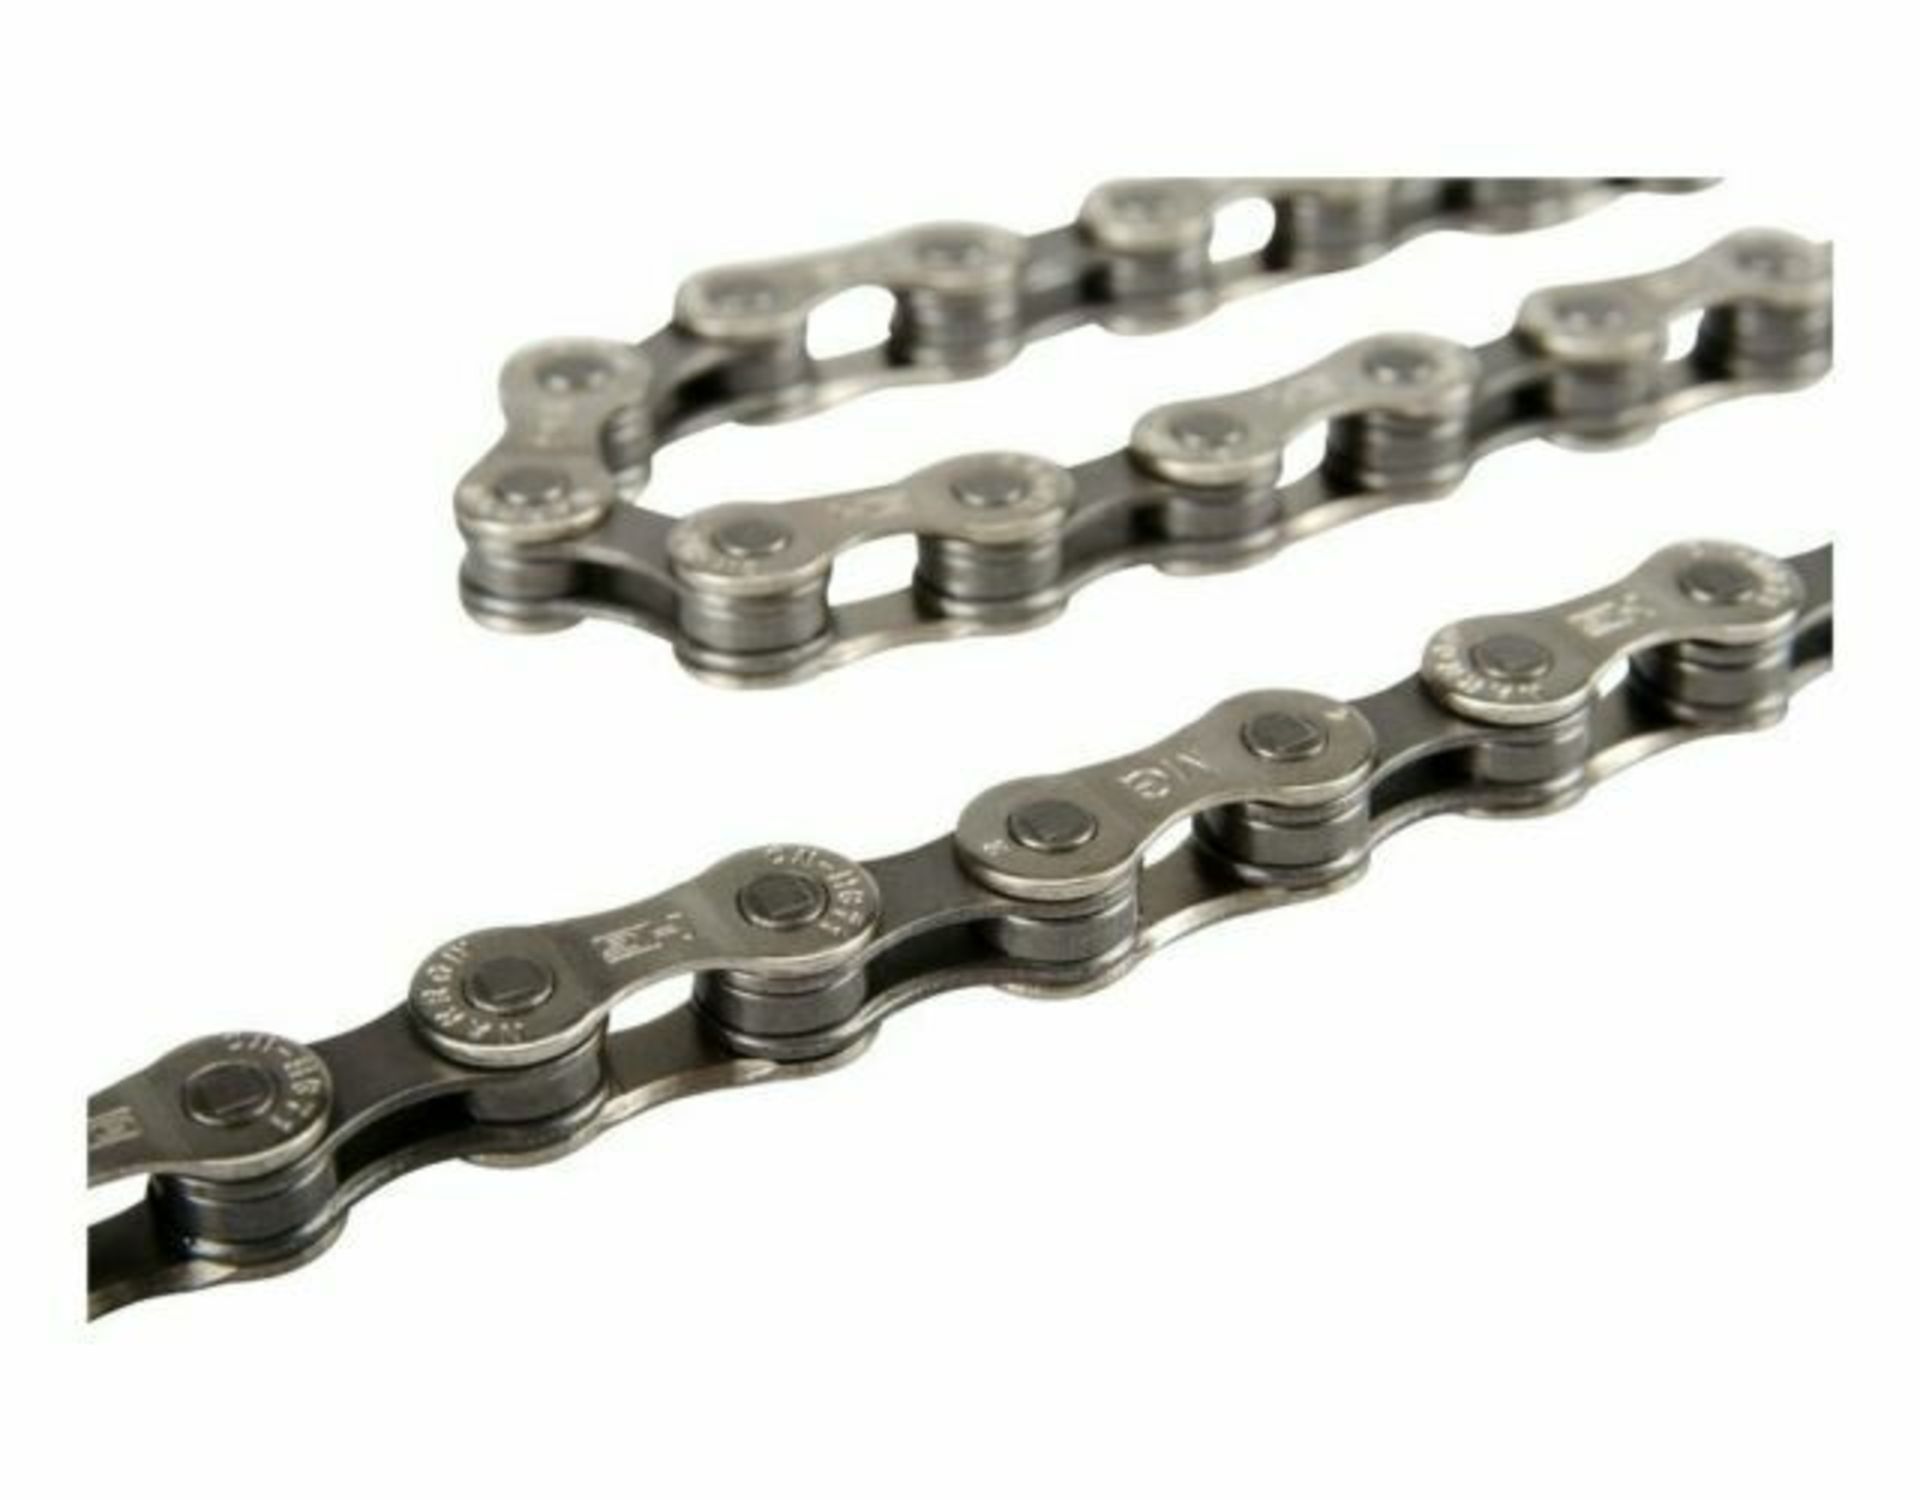 4 x Shimano CN-HG71 Chains - 6, 7, 8-Speed, 116 Links - Image 2 of 4